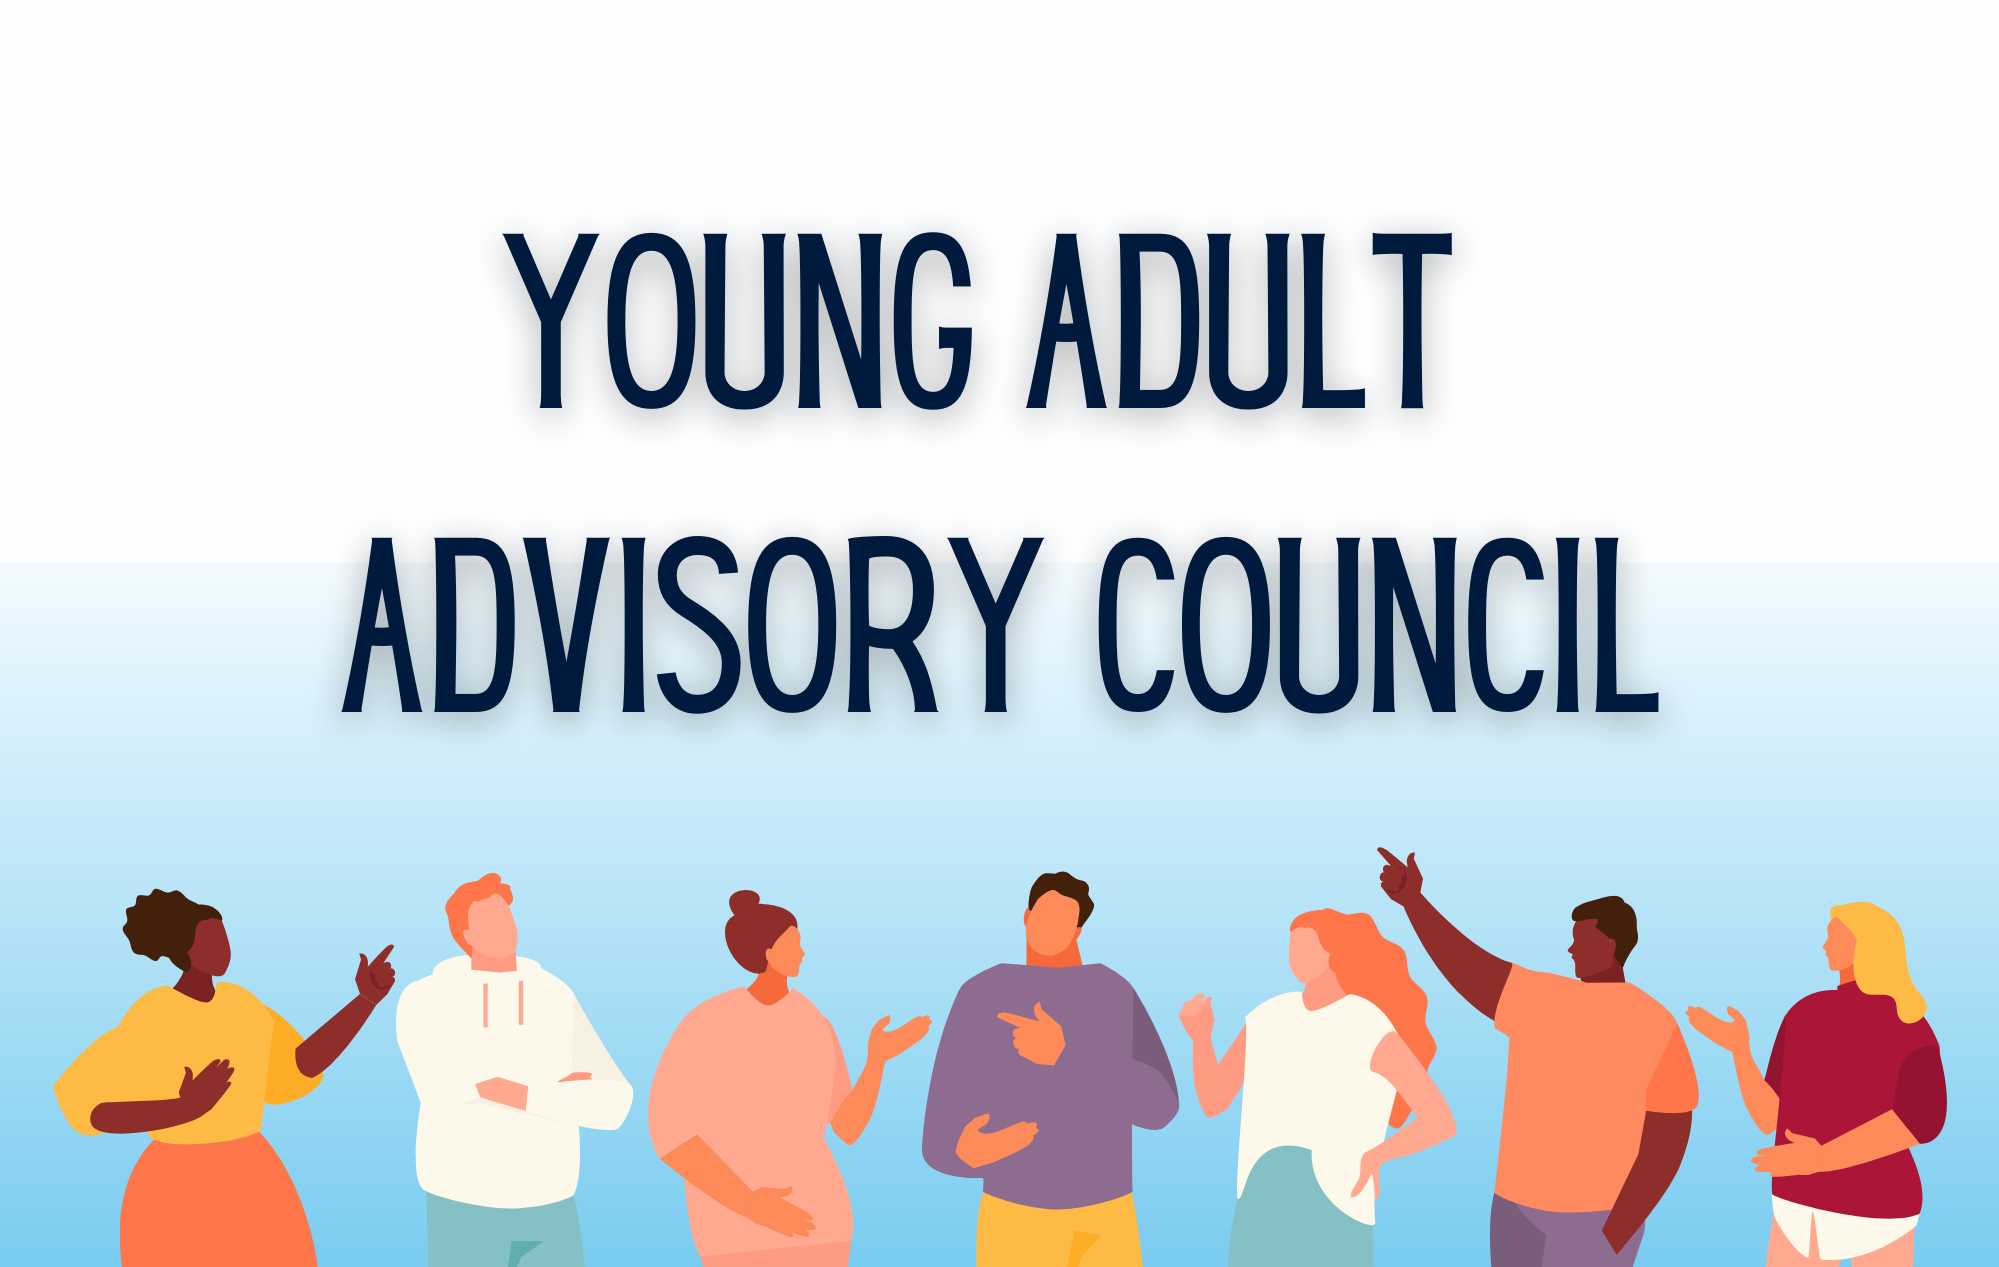 graphic of abstract young adults under the words "Young Adult Advisory Council"